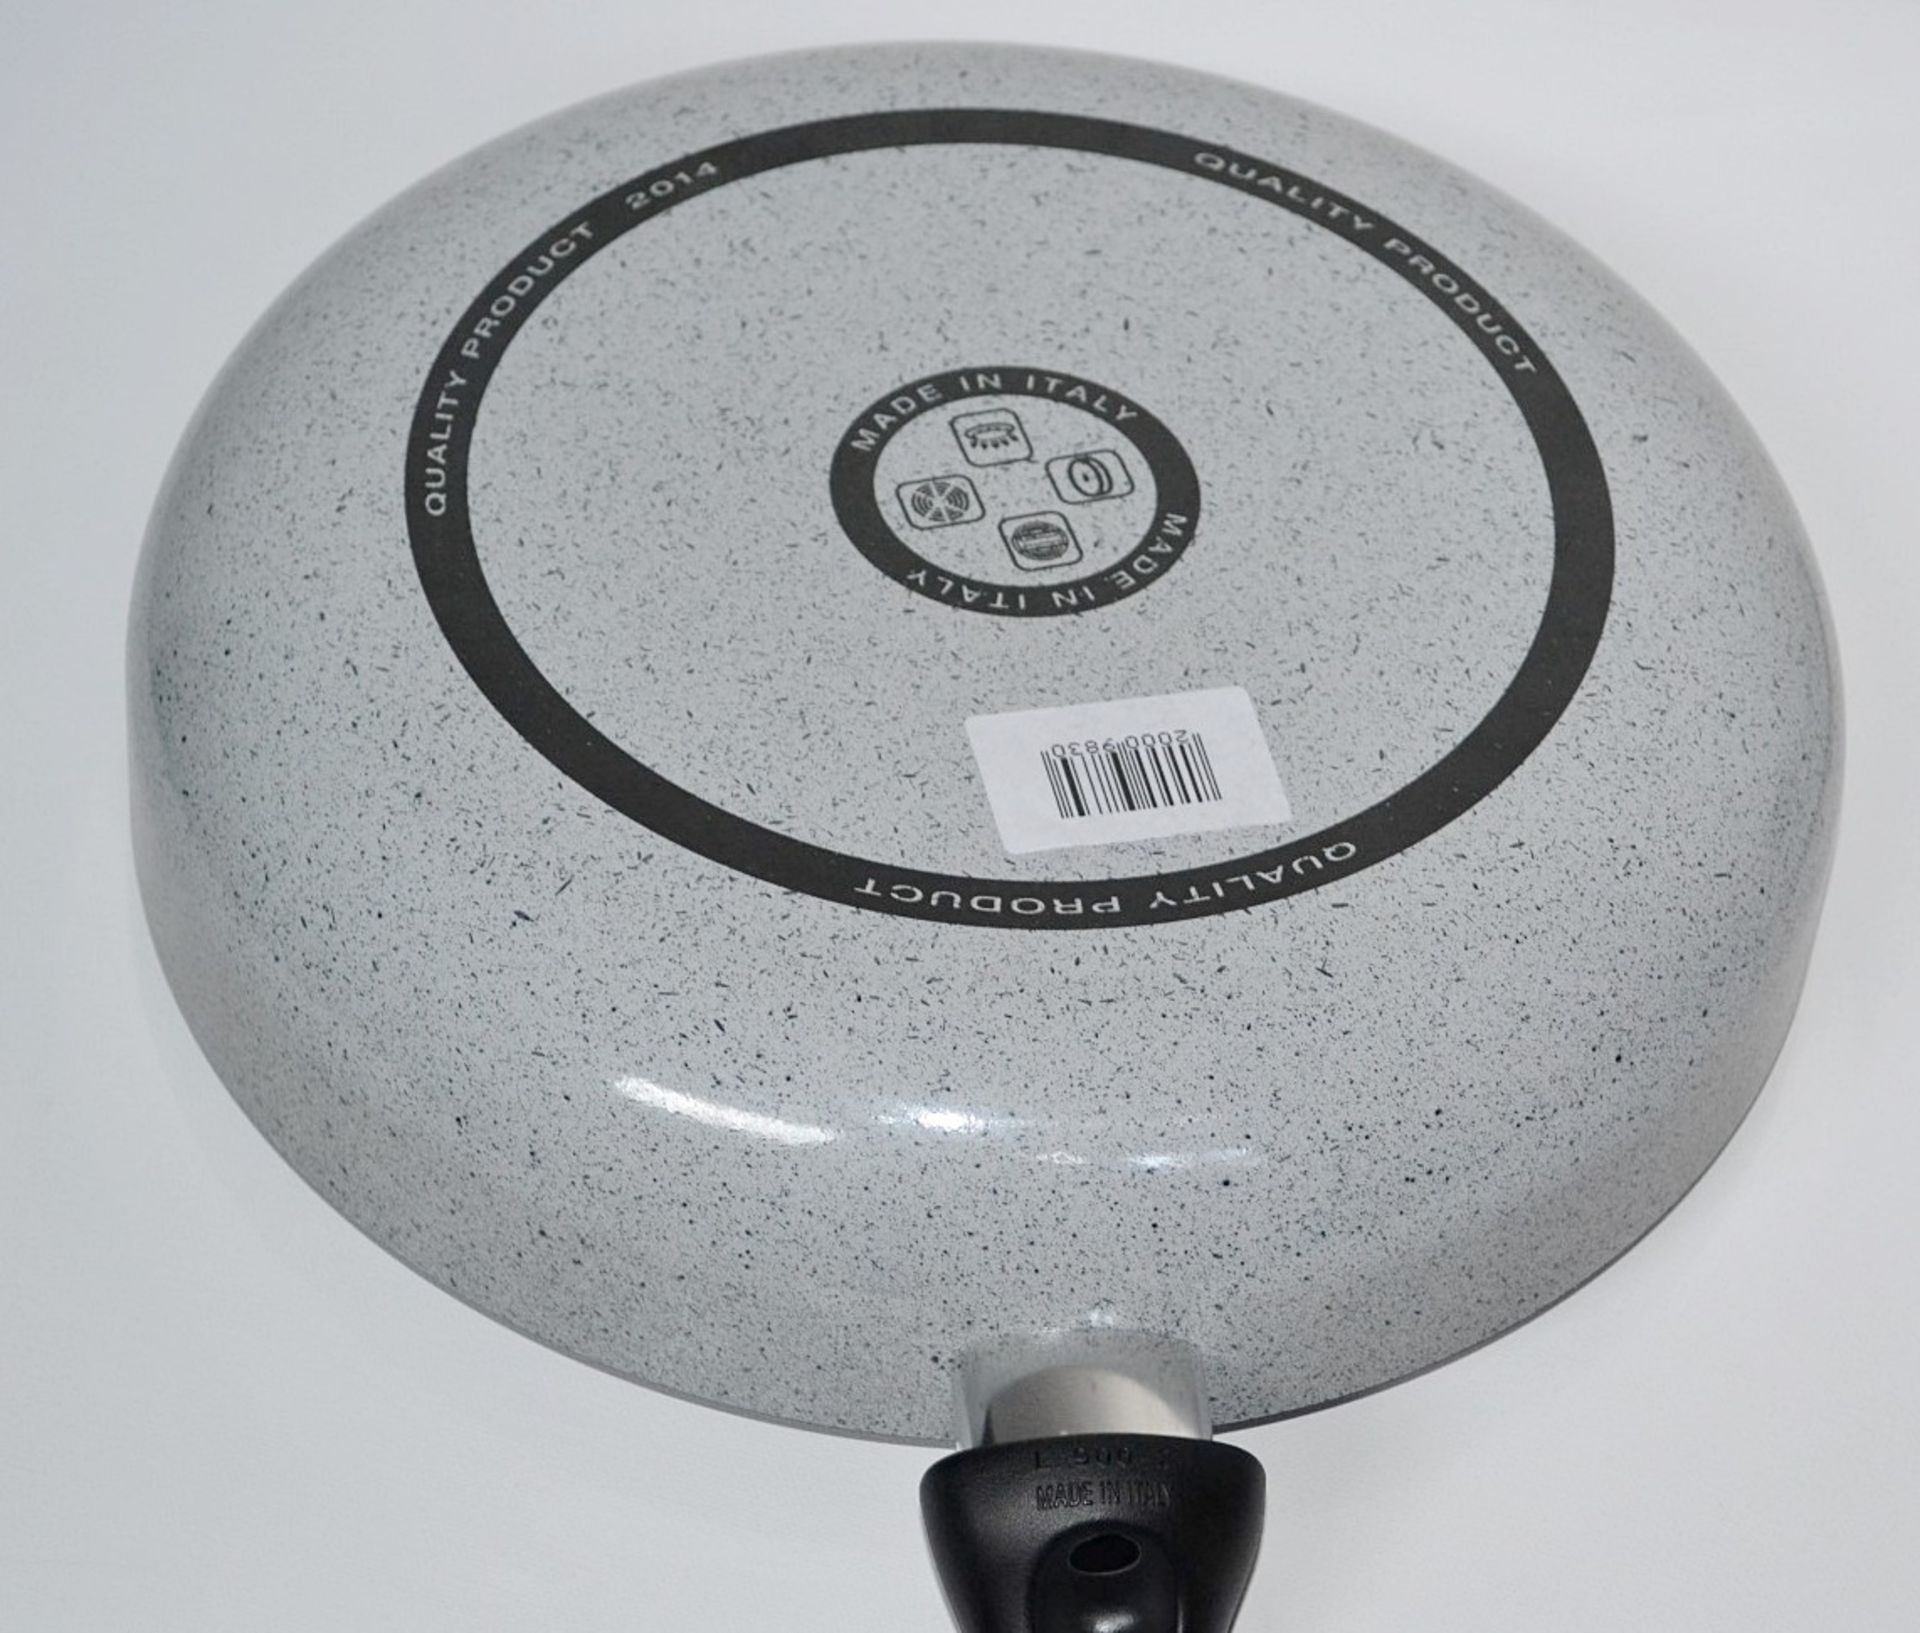 1 x 28cm Non-stick Frying Pans with Glass Lids - Colour: Stone Grey - Made In Italy - New & Sealed S - Image 3 of 5